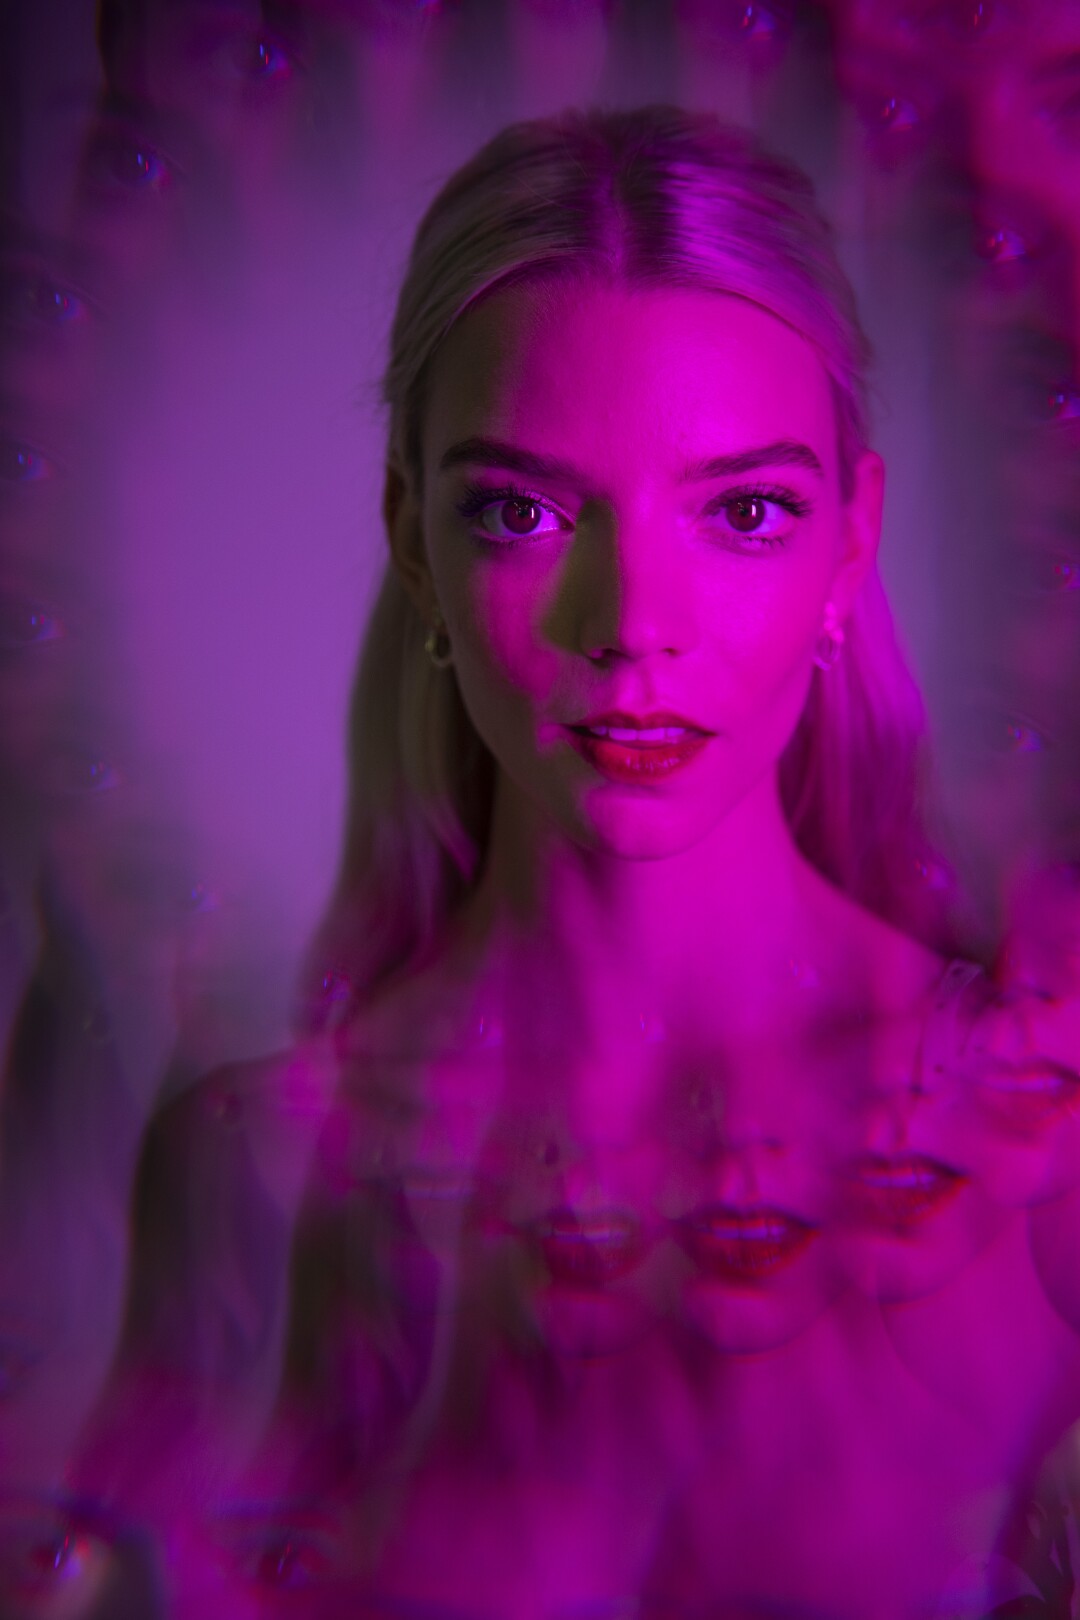 Aug. 6: A woman in a stylized pink lighted image with copies of her mouth on her chest